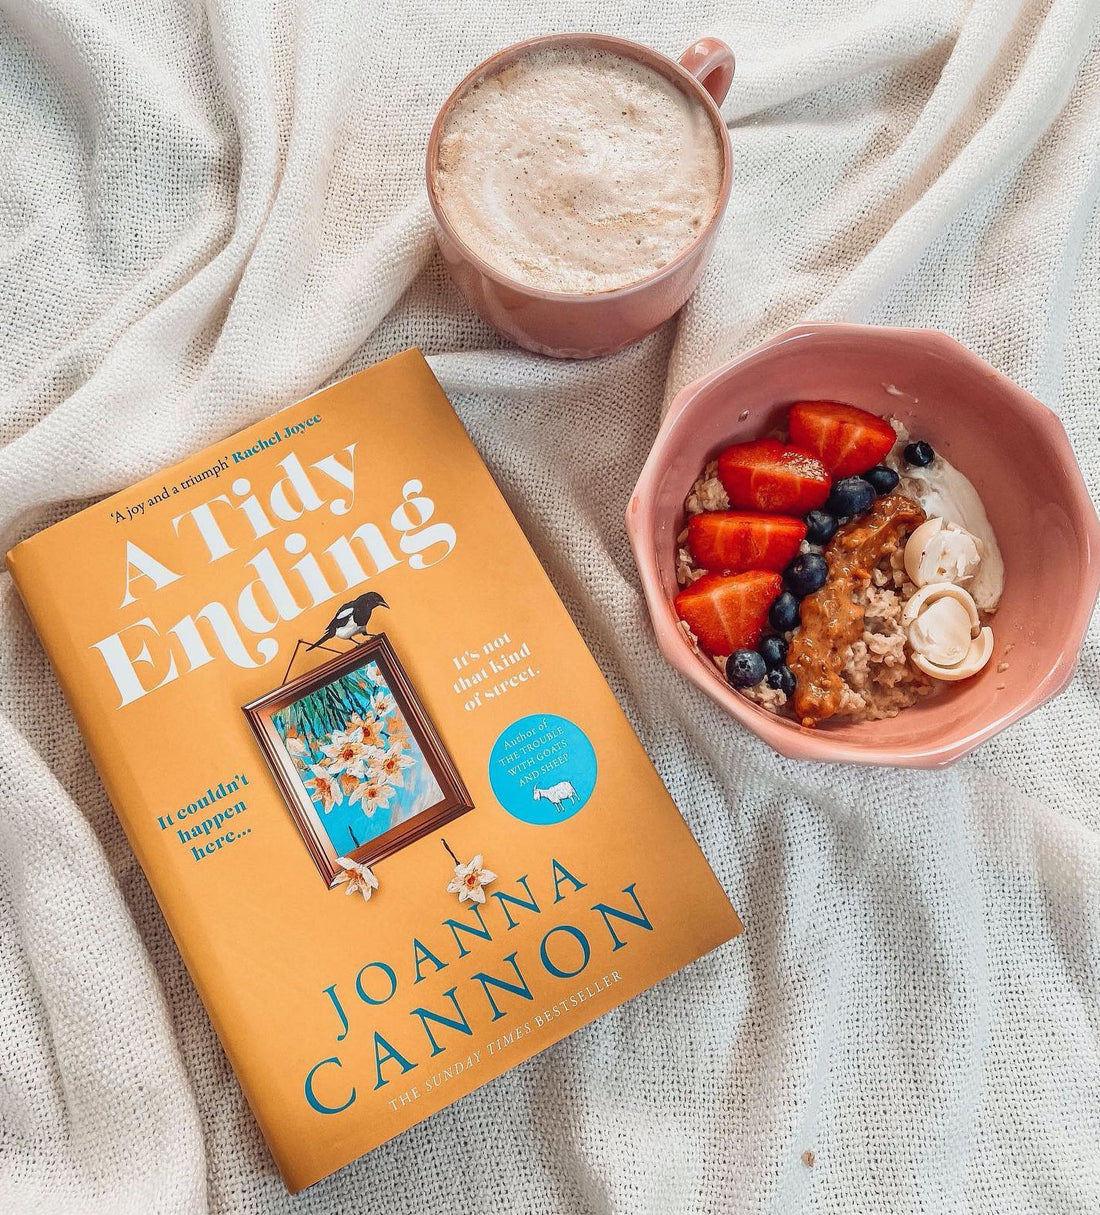 Book Review: A Tidy Ending - Joanna Cannon